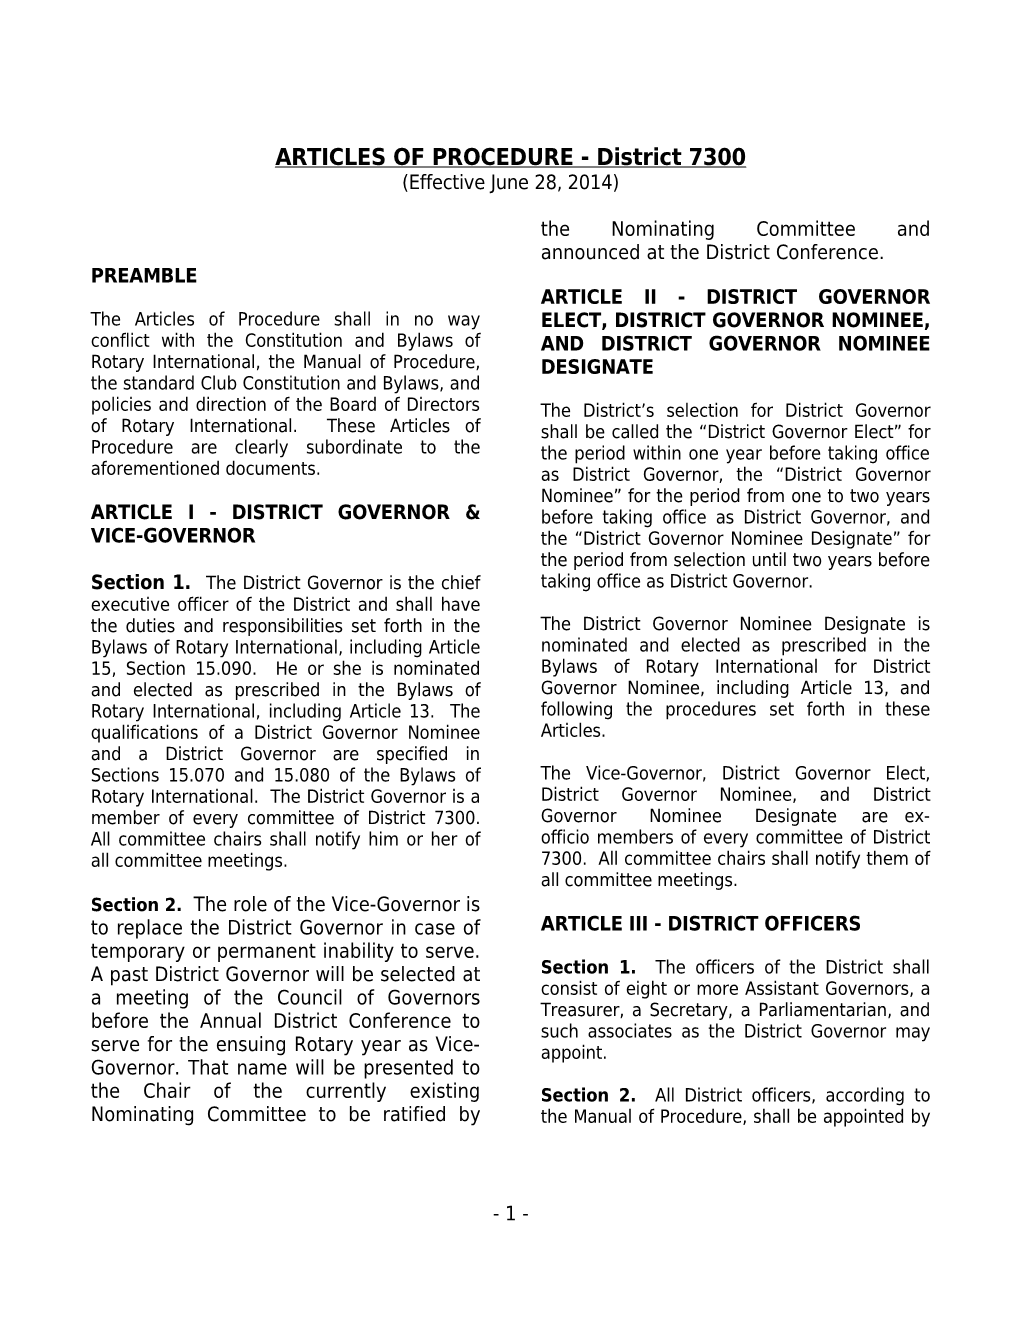 Rotary District 7300 Articles of Procedure (6/28/2014) (D0372041;1)